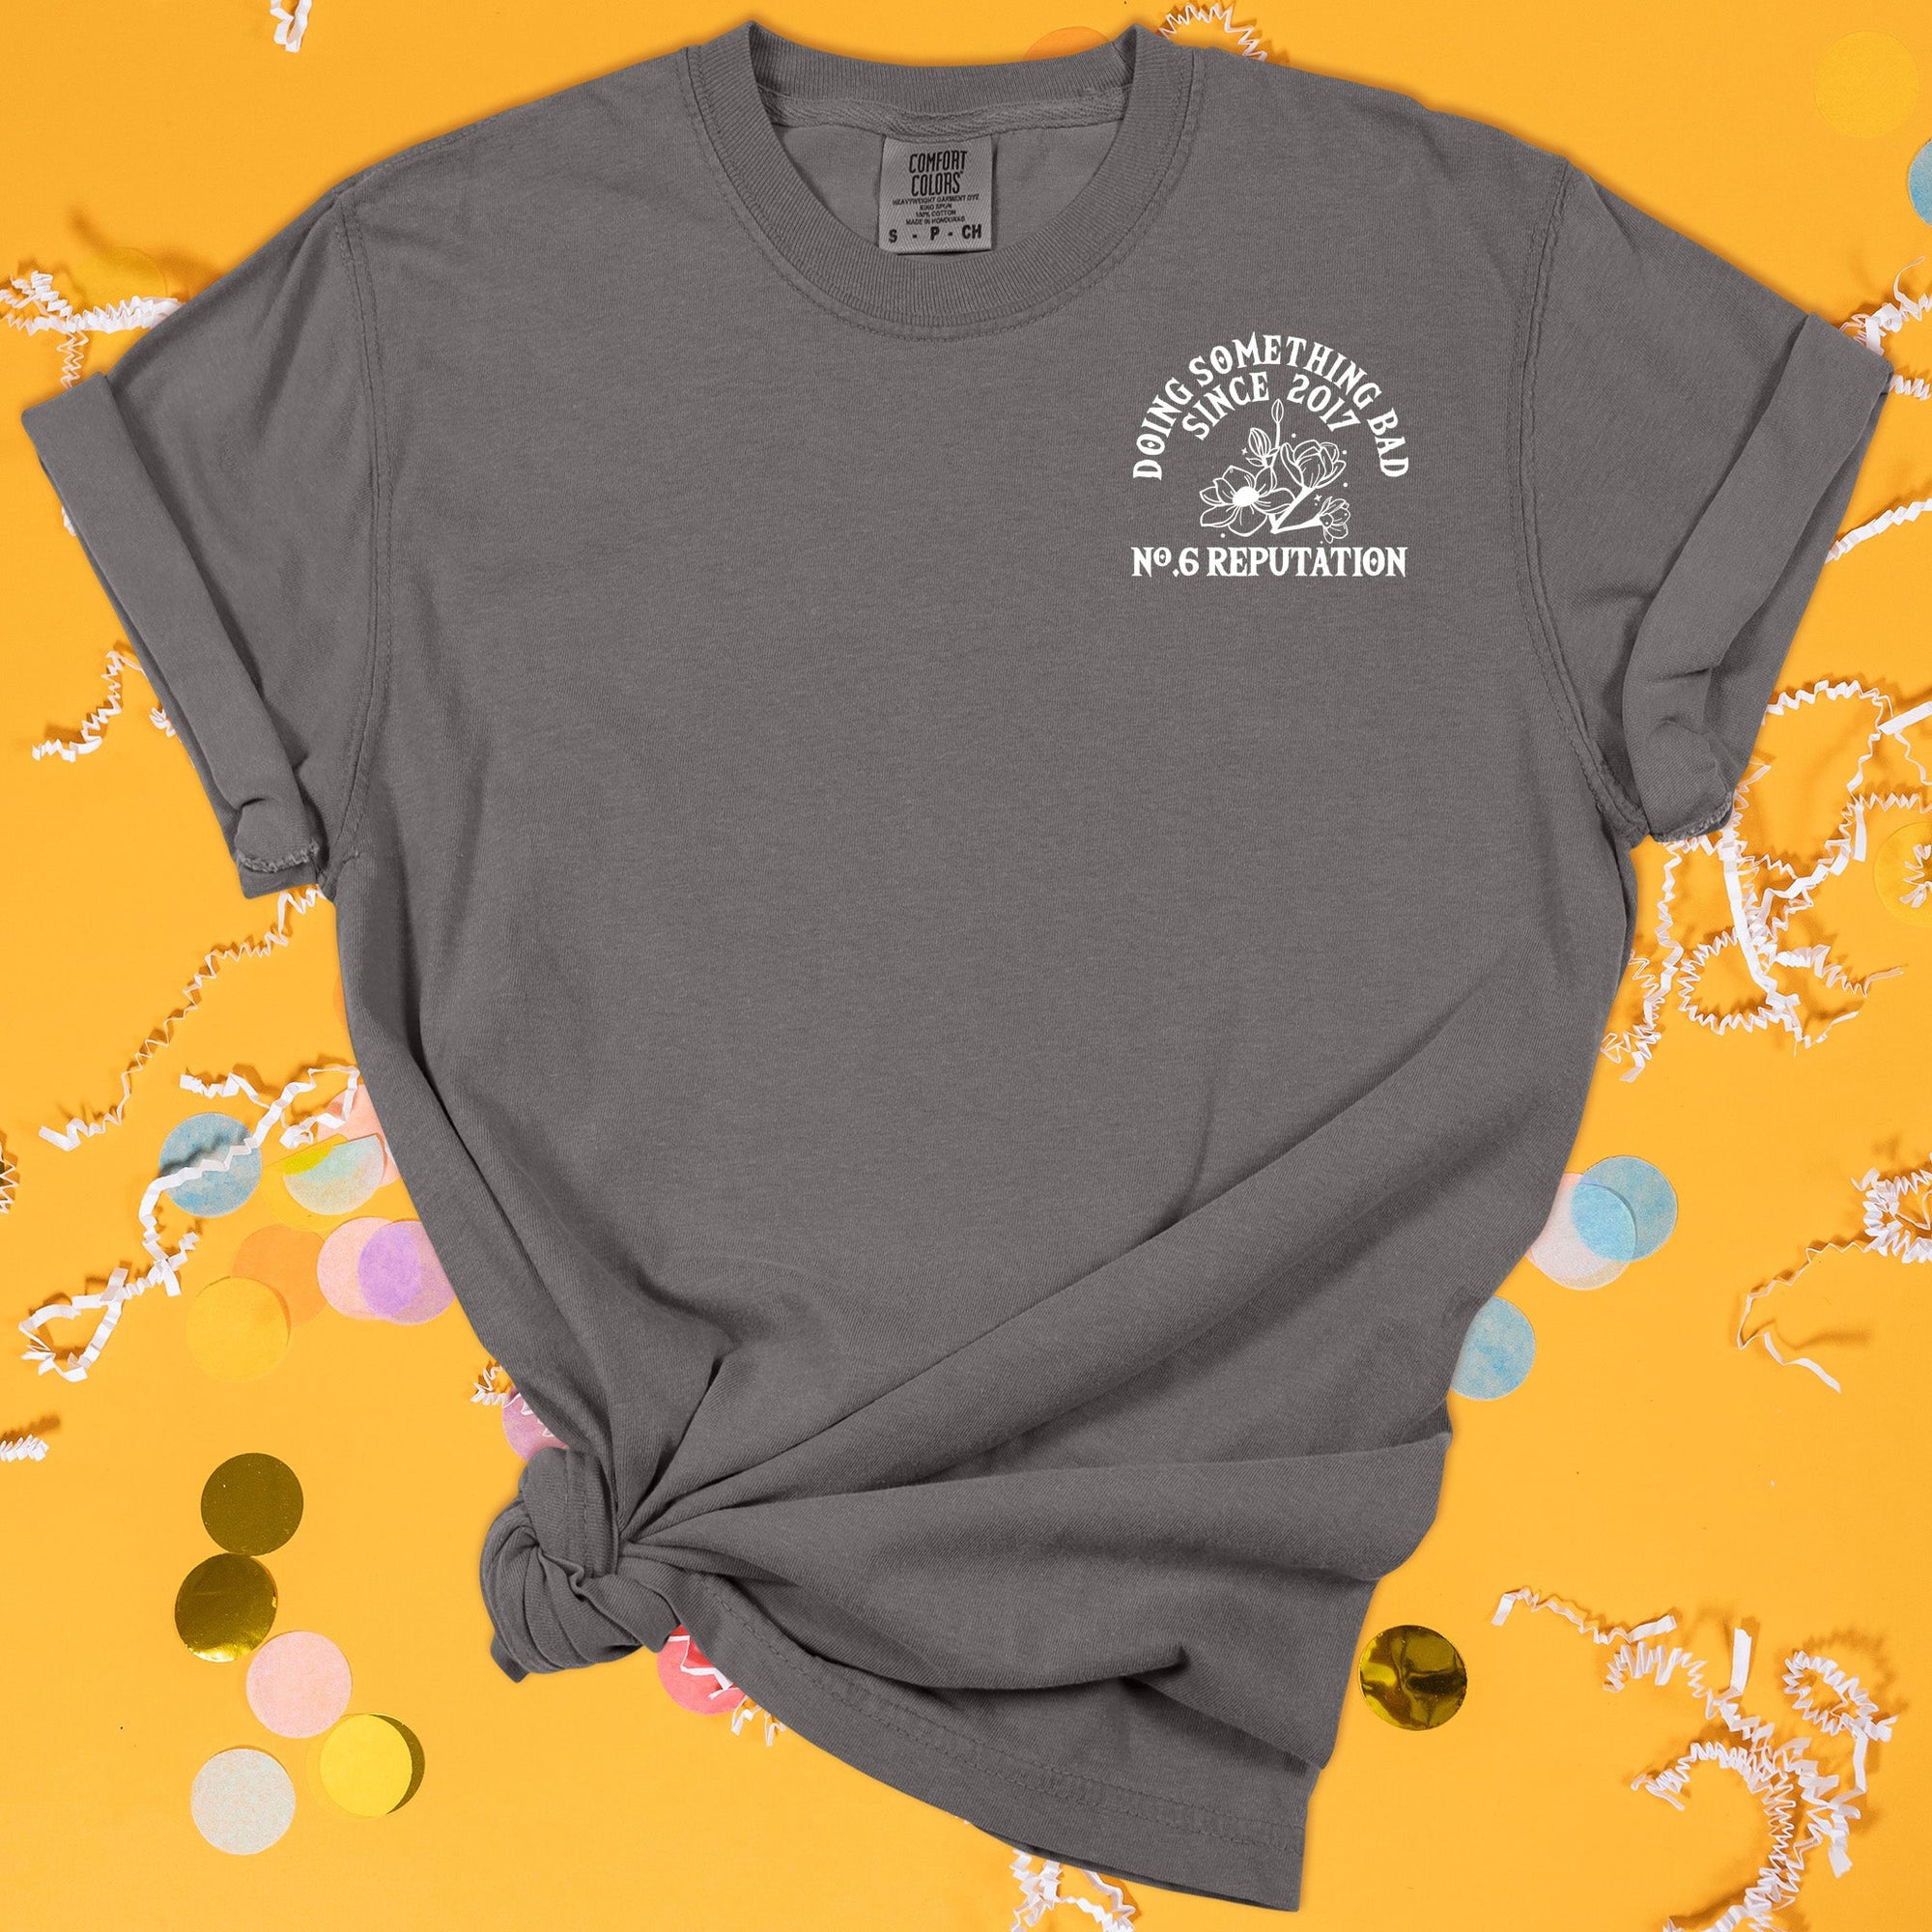 On a sunny mustard background sits the front of a t-shirt with white crinkle and big, colorful confetti scattered around. This Taylor Swift Inspired Reputation tee is dark grey with white lettering and illustration over the top left chest. There are flowers and it says "DOING SOMETHING BAD SINCE 2017, NO.6 REPUTATION" in all caps.